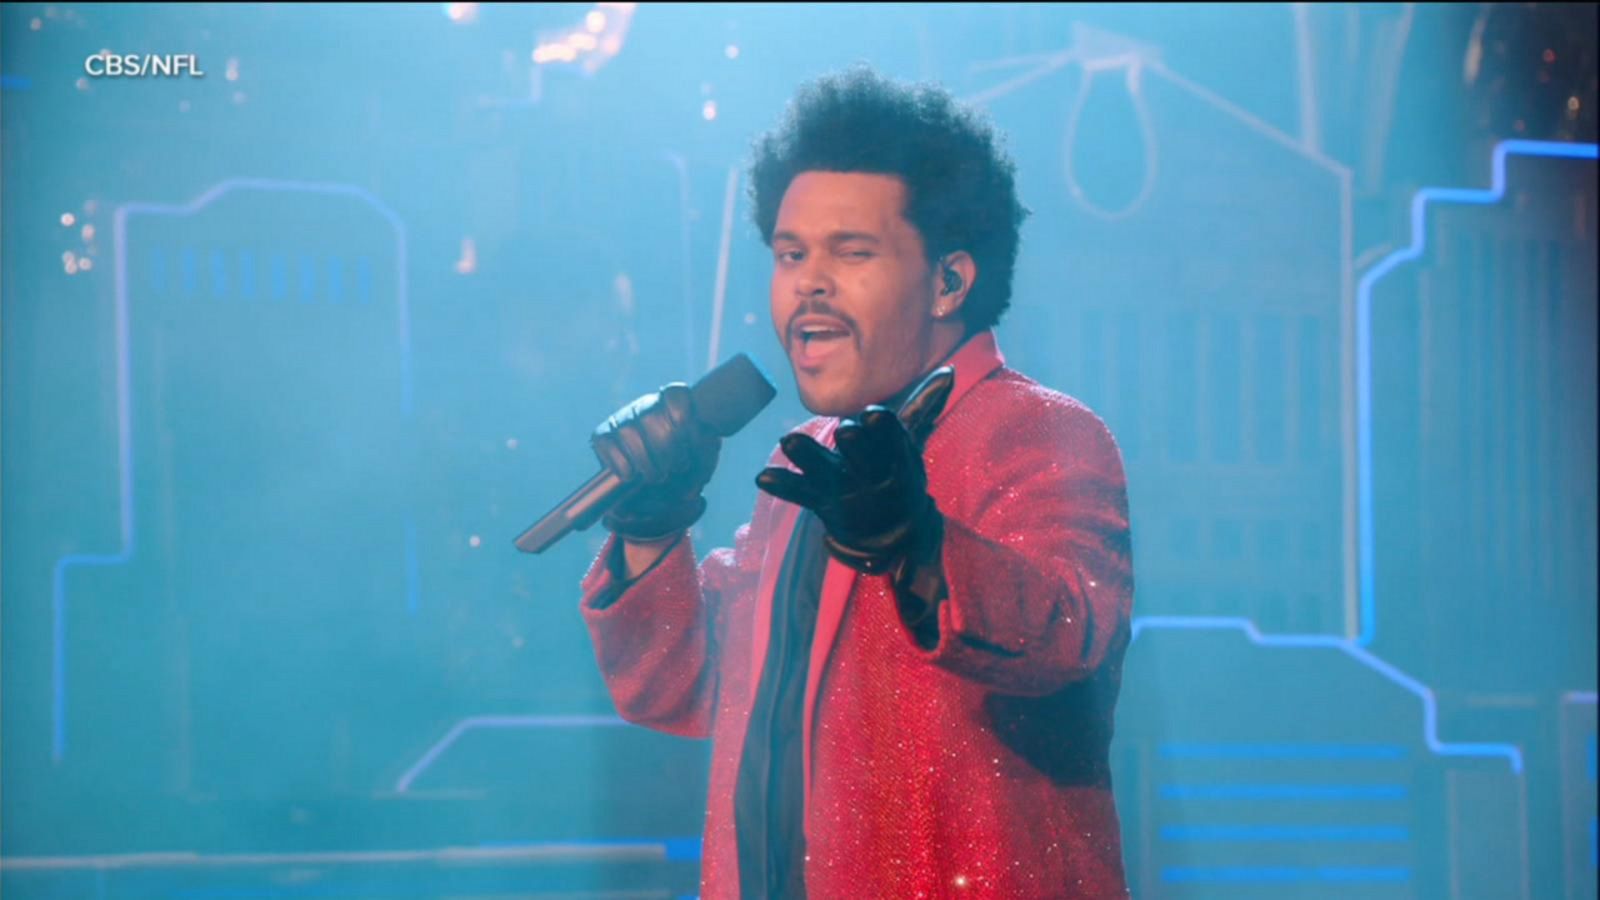 The Weeknd gets emotional in Super Bowl 2021 commercial